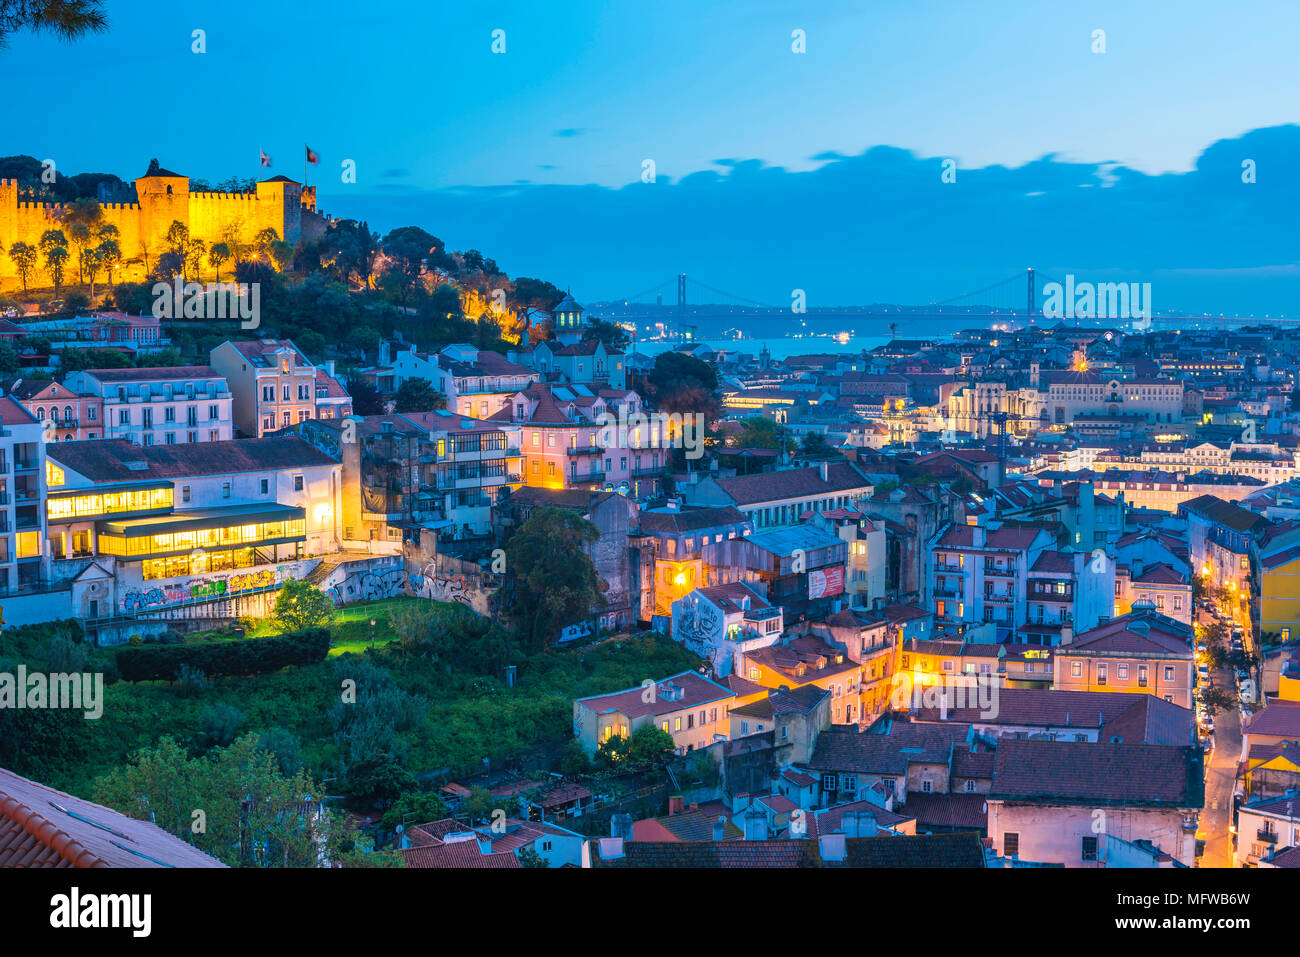 Lisbon Portugal city, view at night across the rooftops of the old town Mouraria area towards the center of the city of Lisbon, Portugal. Stock Photo